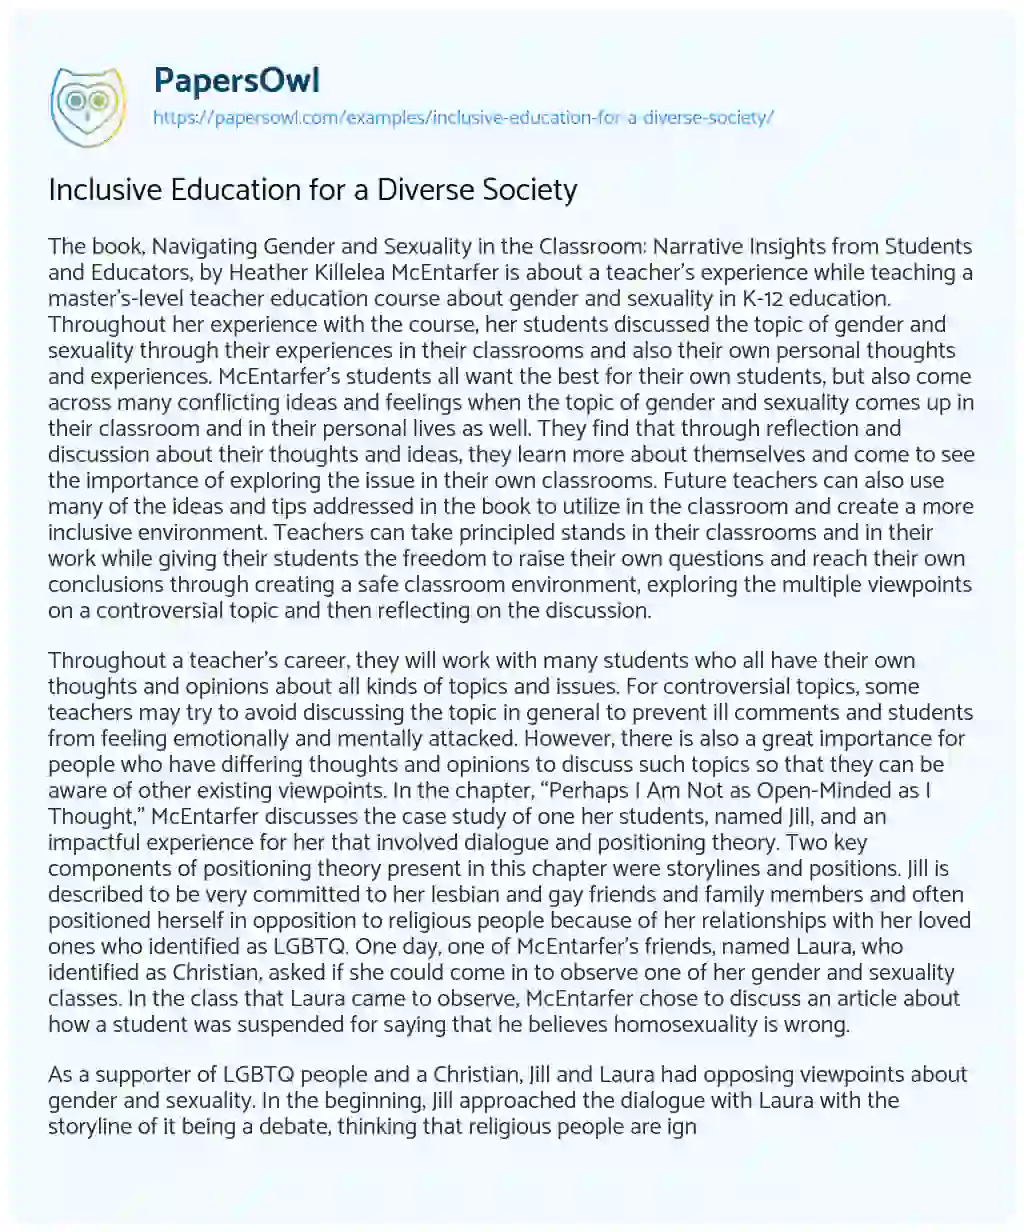 Essay on Inclusive Education for a Diverse Society